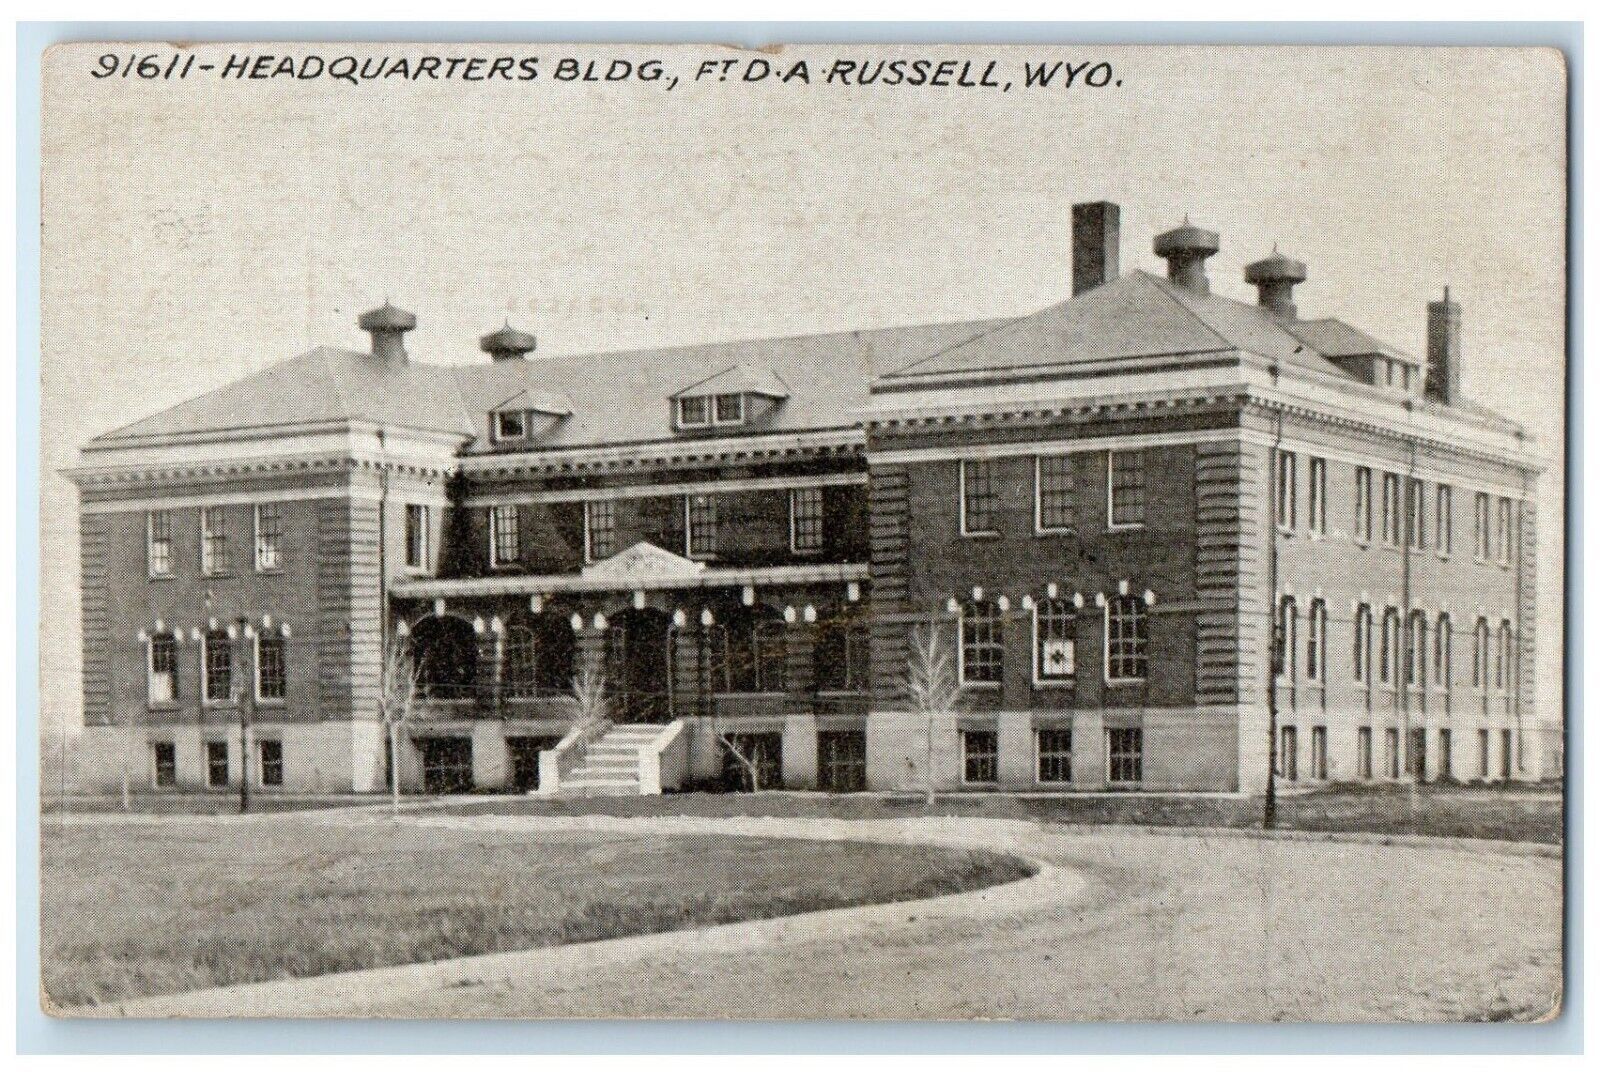 c1920 Headquarters Building Fort DA Exterior Russell Wyoming WY Vintage Postcard